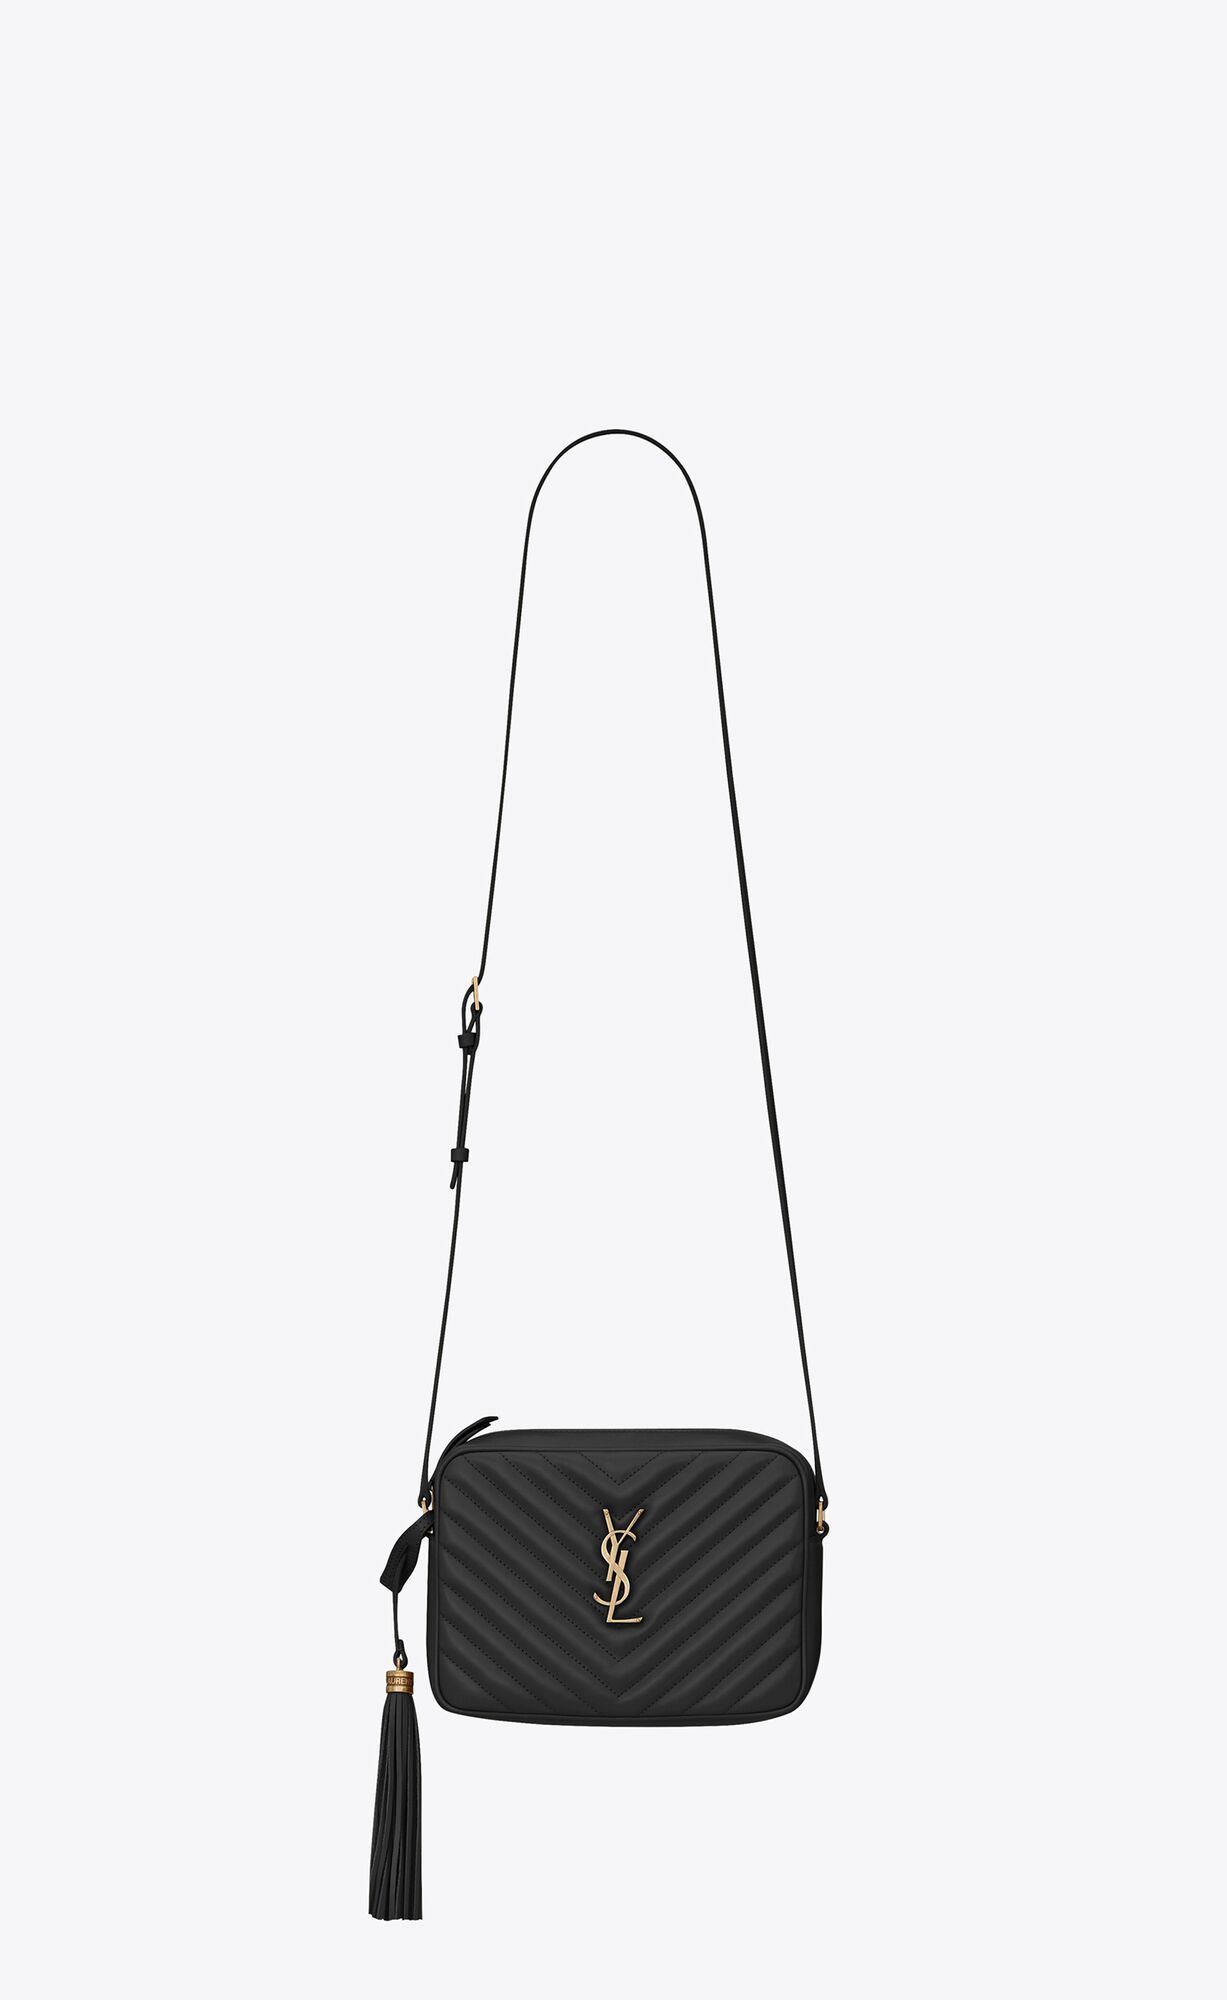 LOU camera bag in quilted leather | Saint Laurent __locale_country__ | YSL.com | Saint Laurent Inc. (Global)